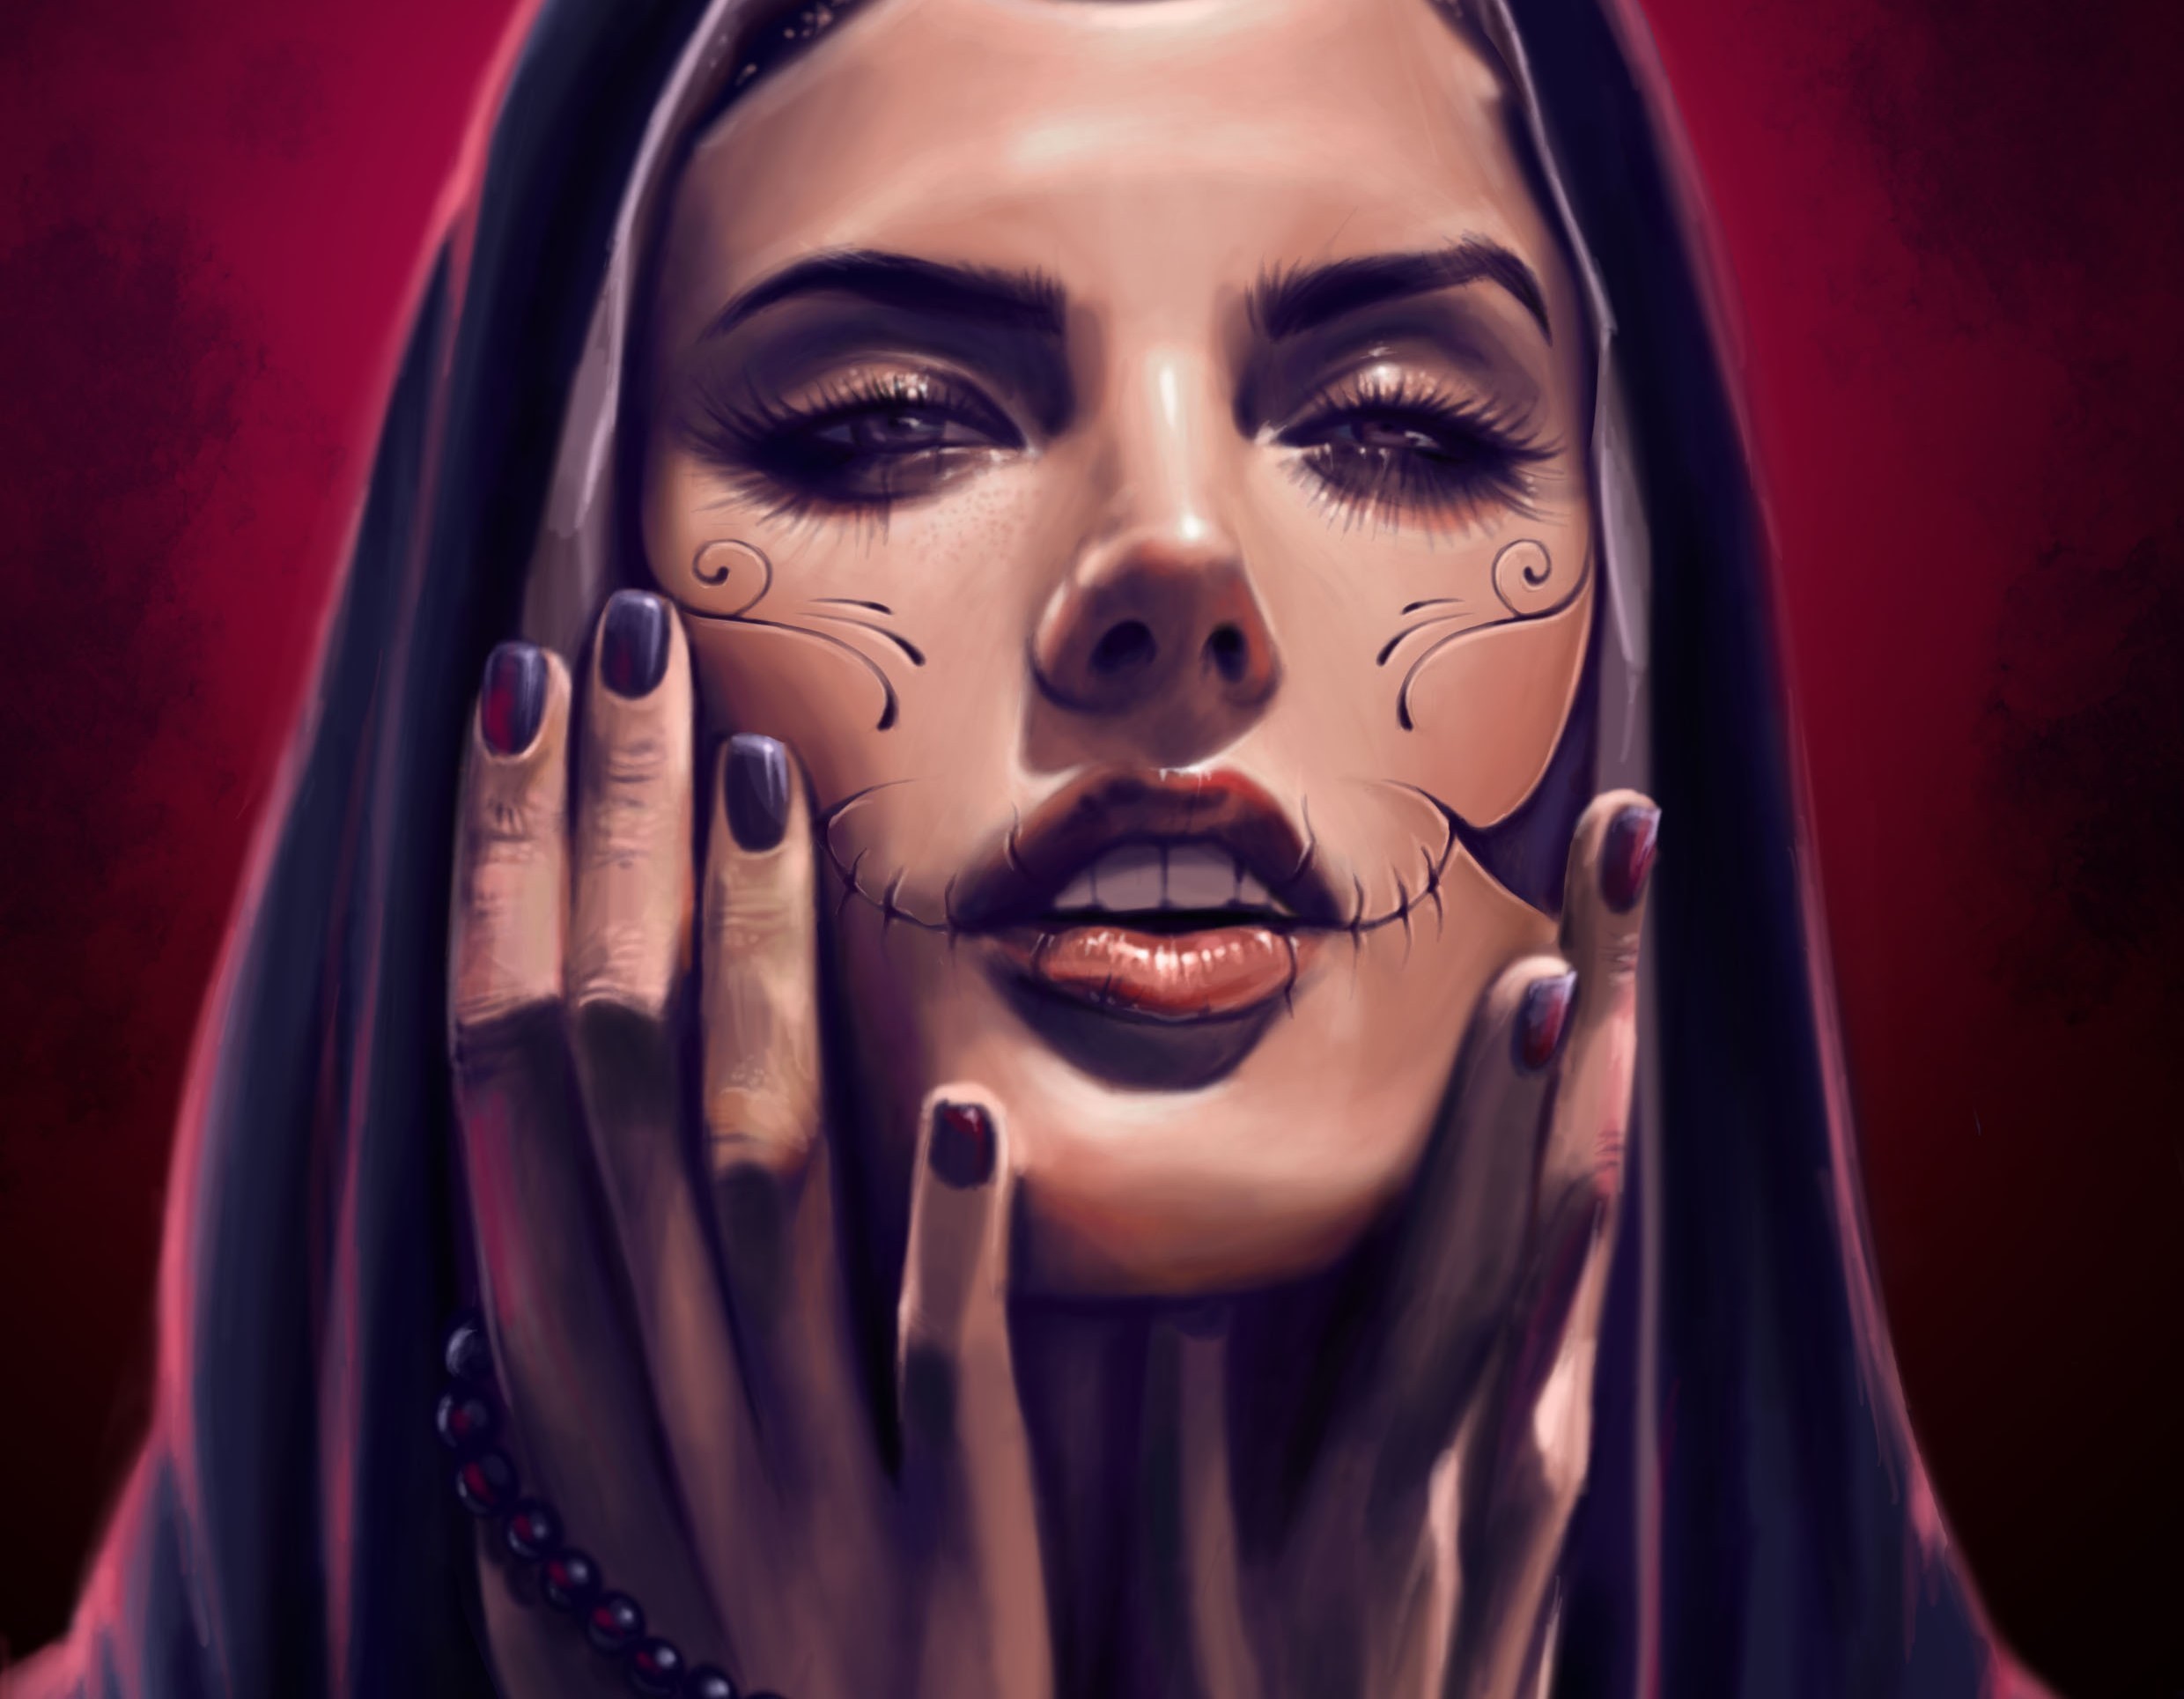 General 2480x1929 artwork fantasy art fantasy girl face women painted nails looking at viewer red lipstick makeup hands